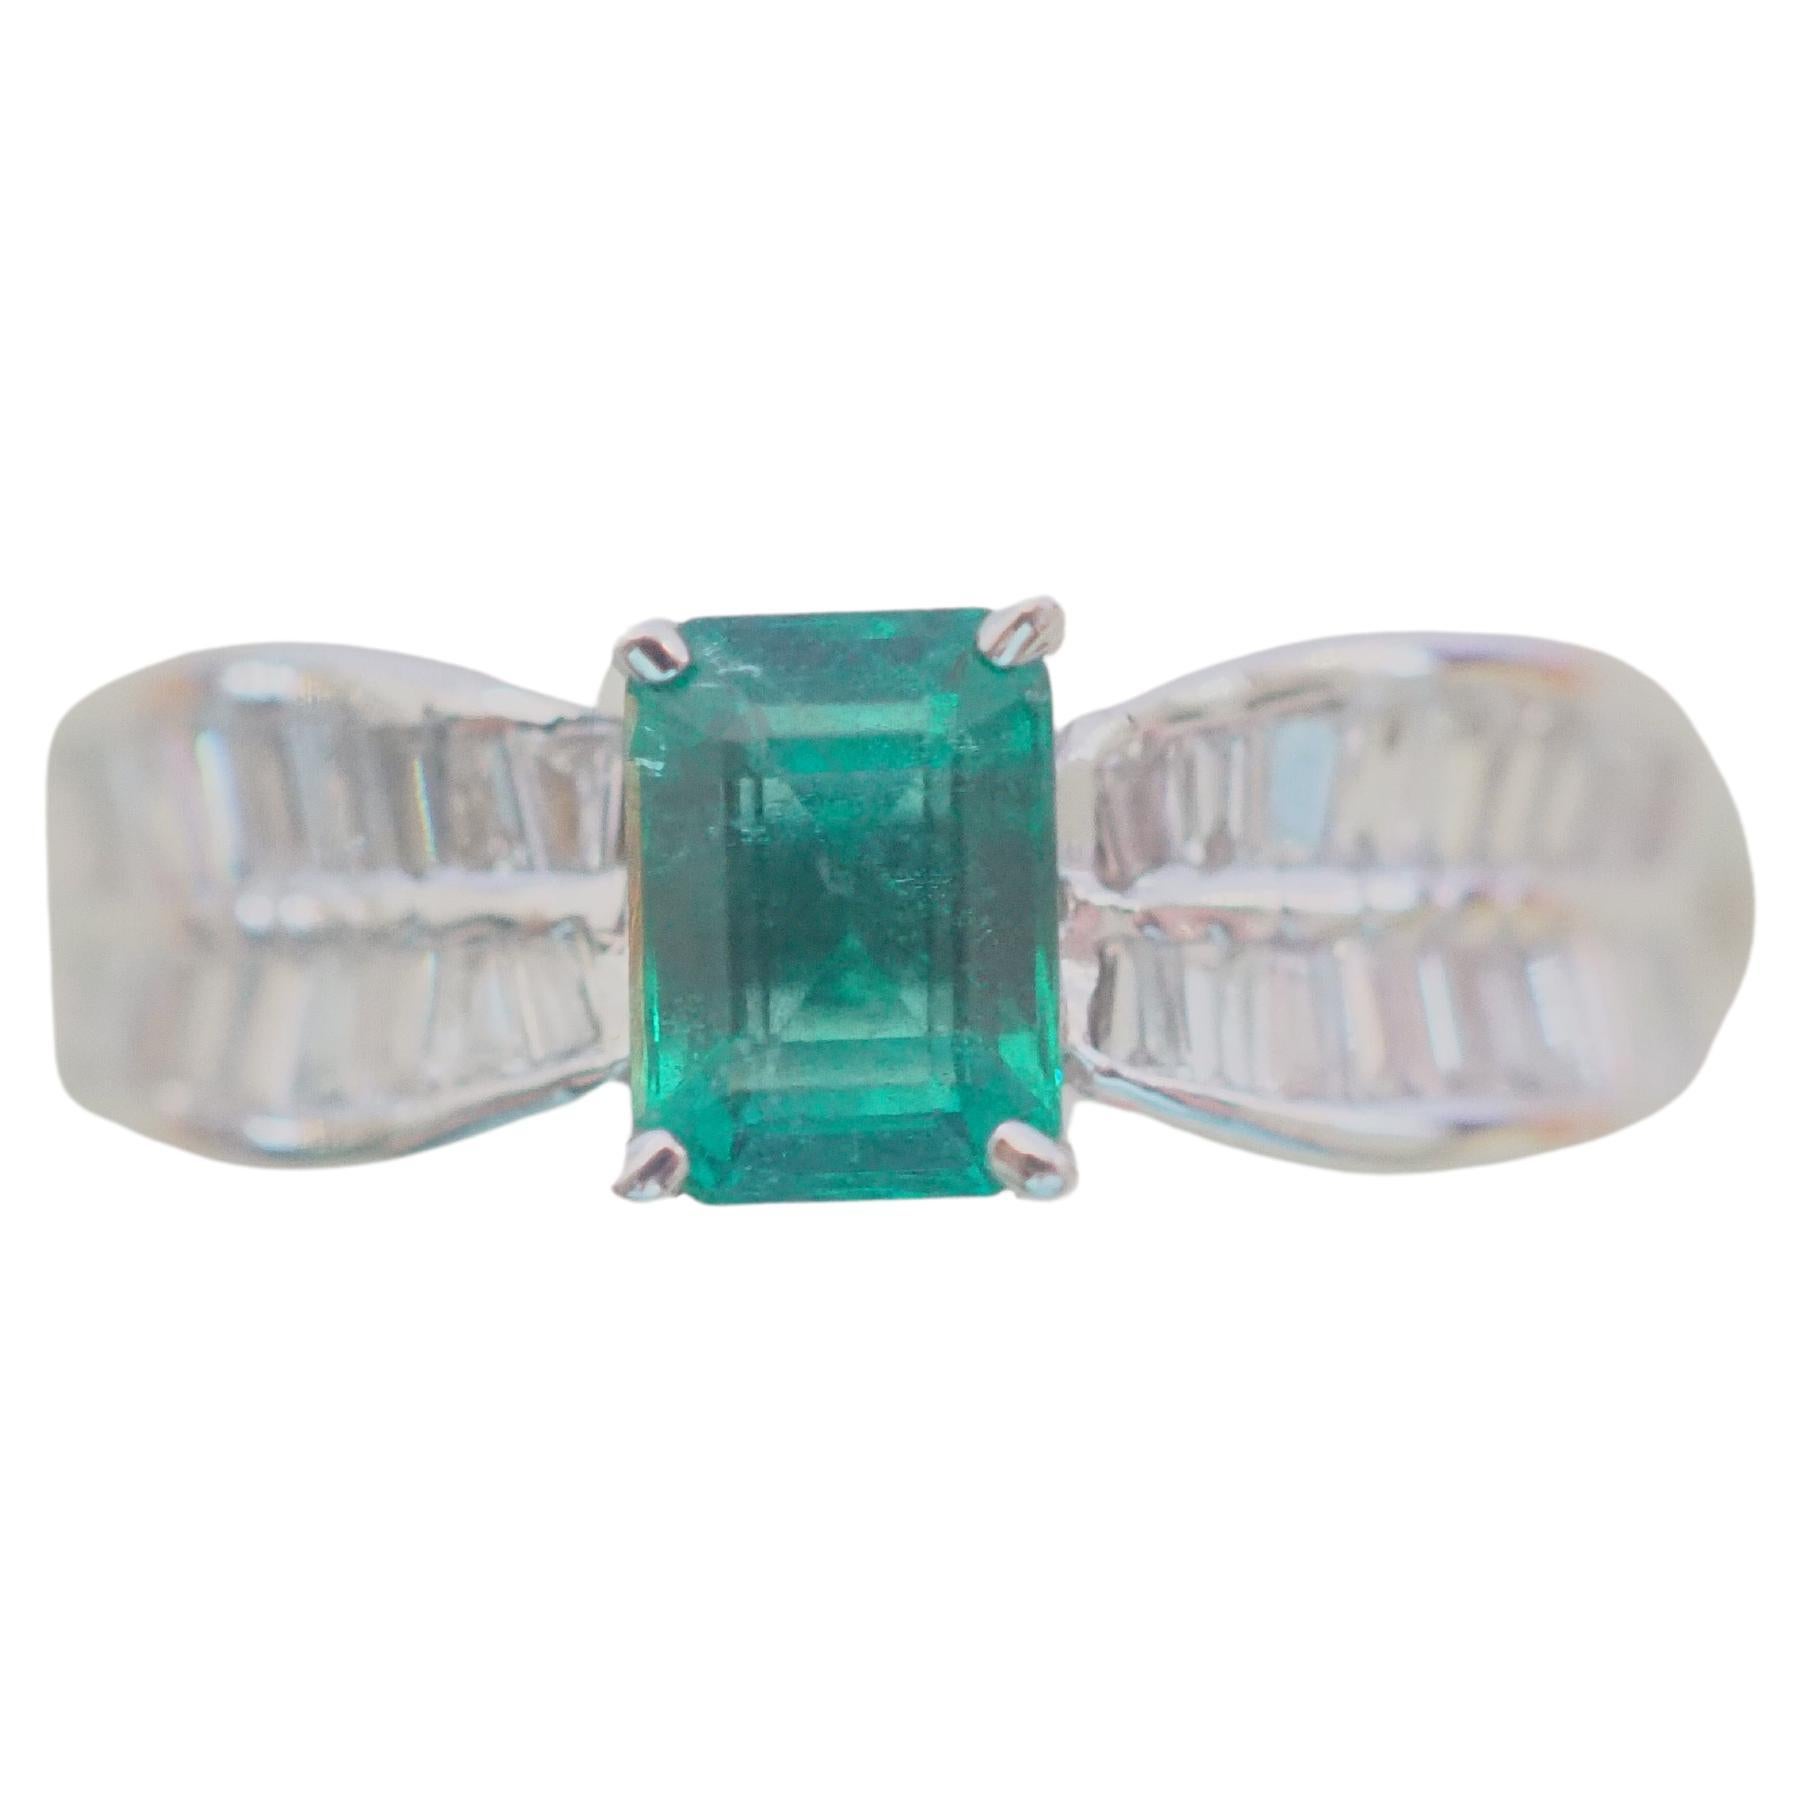 ICA 18k White Gold 0.73ct Insignificant Emerald & 0.53ct Diamond Engagement Ring